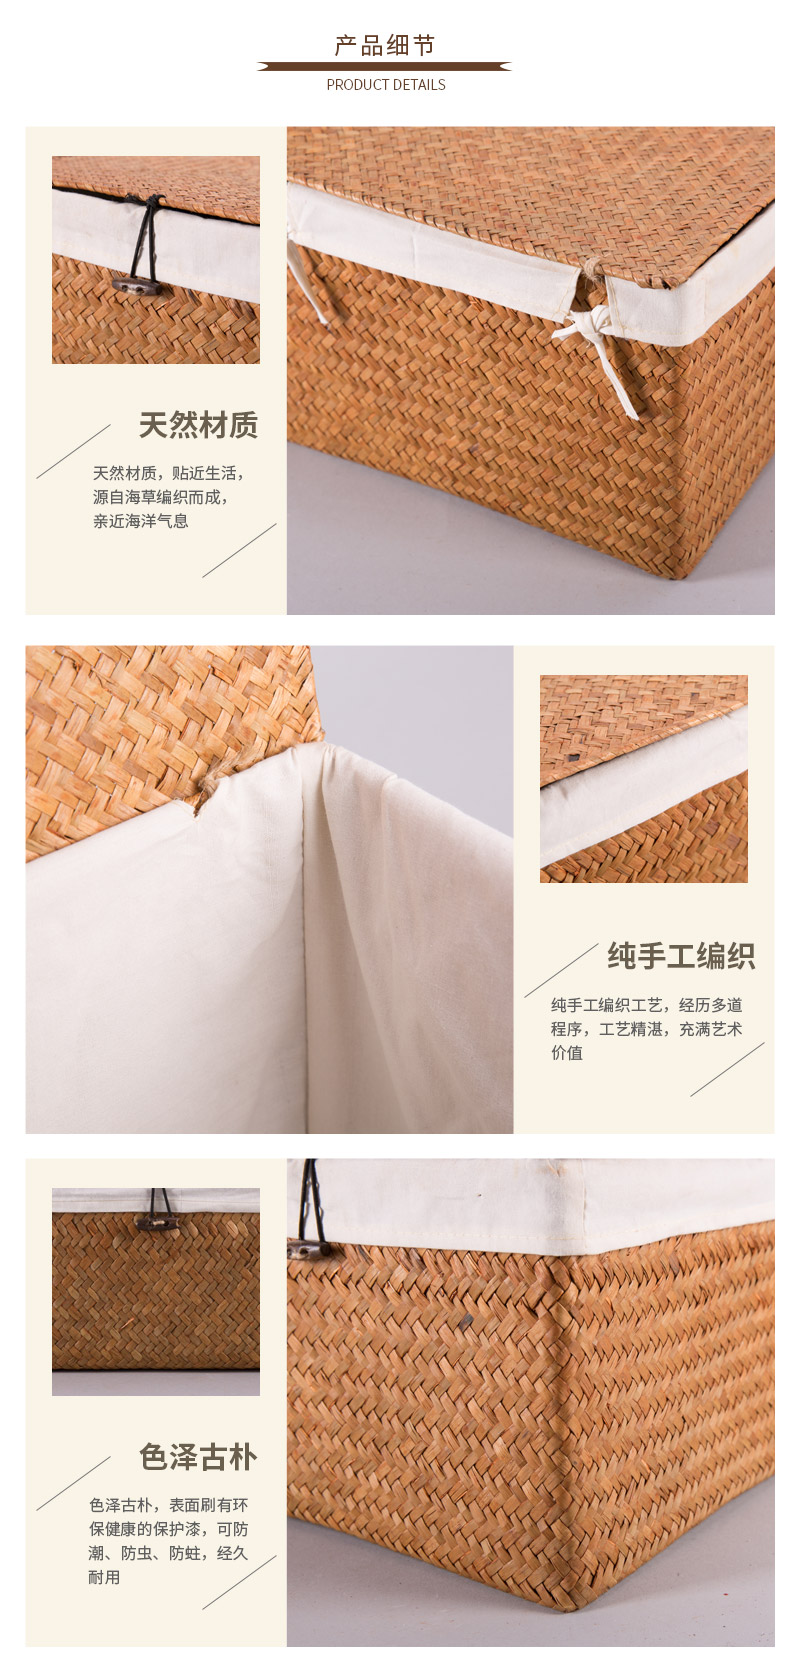 The simple box containing two seaweed woven straw set4